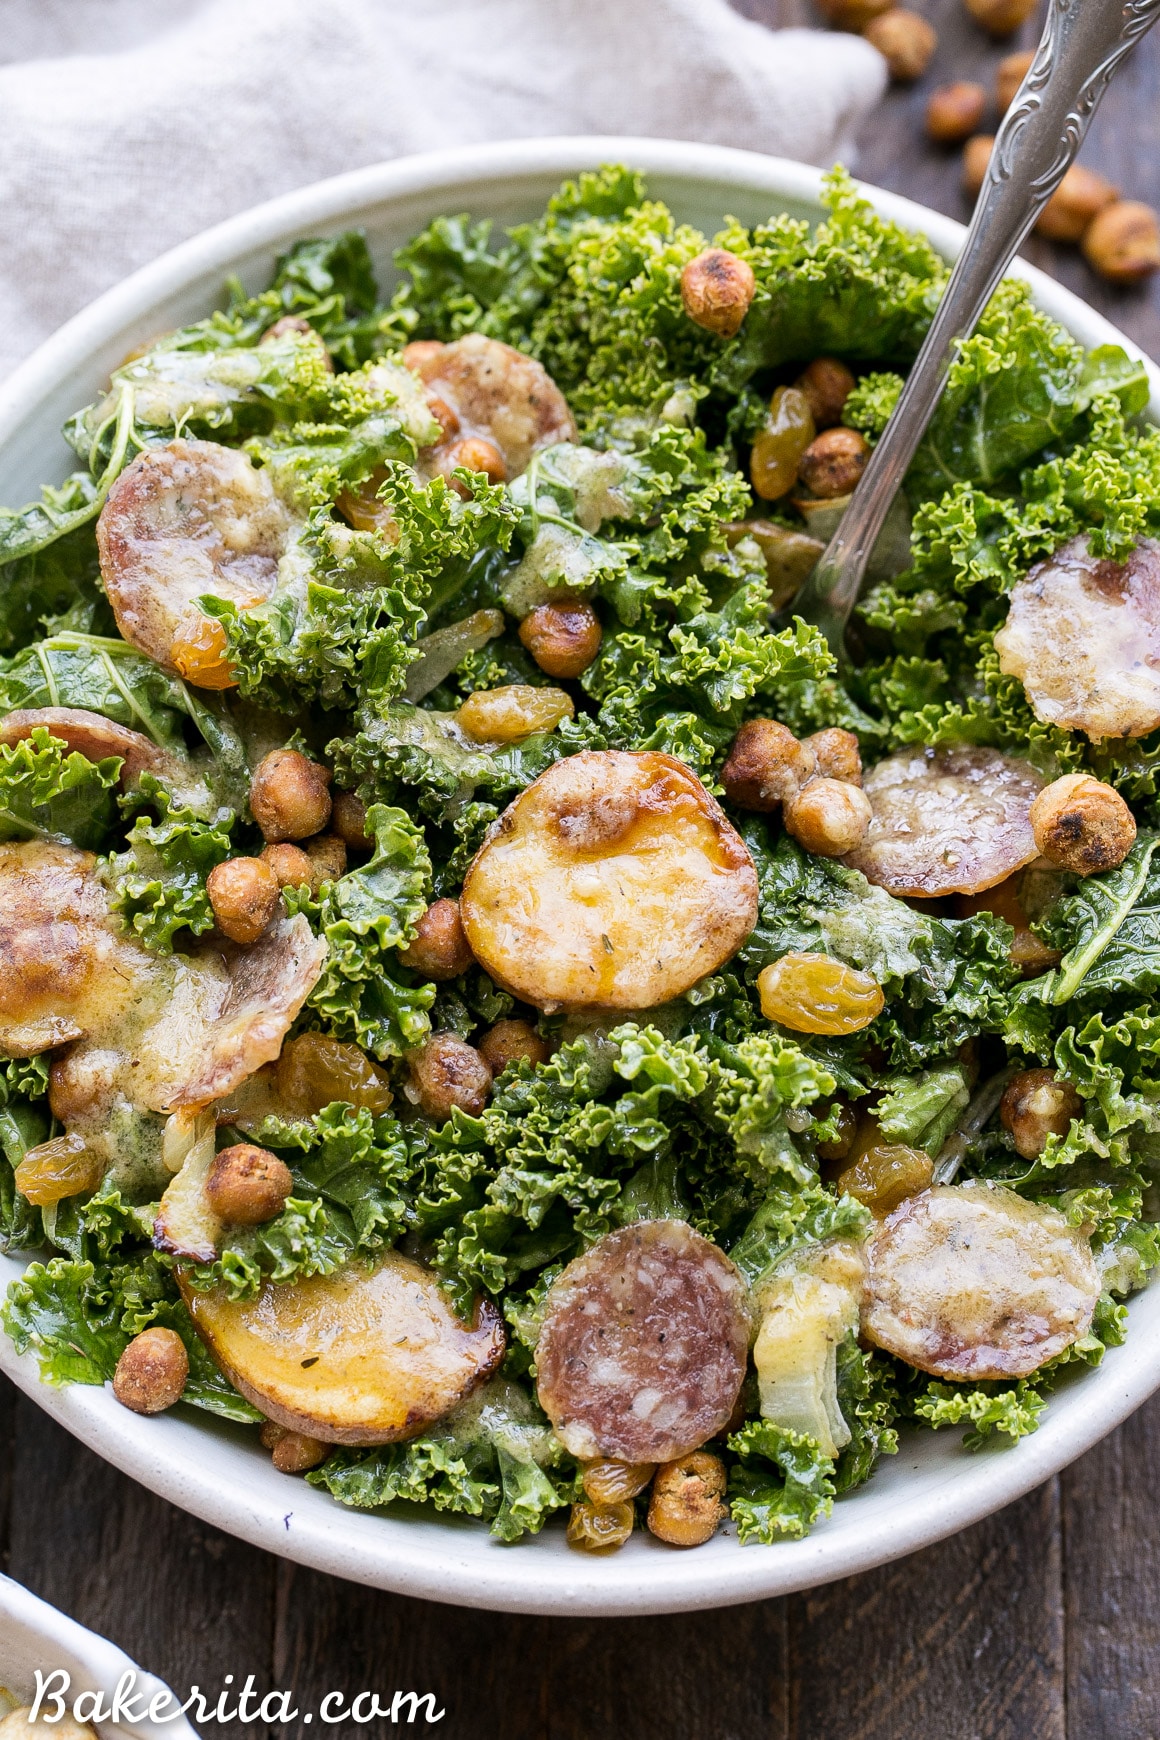 This Kale & Salami Salad with Roasted Garlic Vinaigrette is loaded with roasted fingerling potatoes, crispy toasted chickpeas, golden raisins, and caramelized onions! This filling salad makes the perfect lunch or dinner. It's gluten free and dairy free, with a Paleo option.